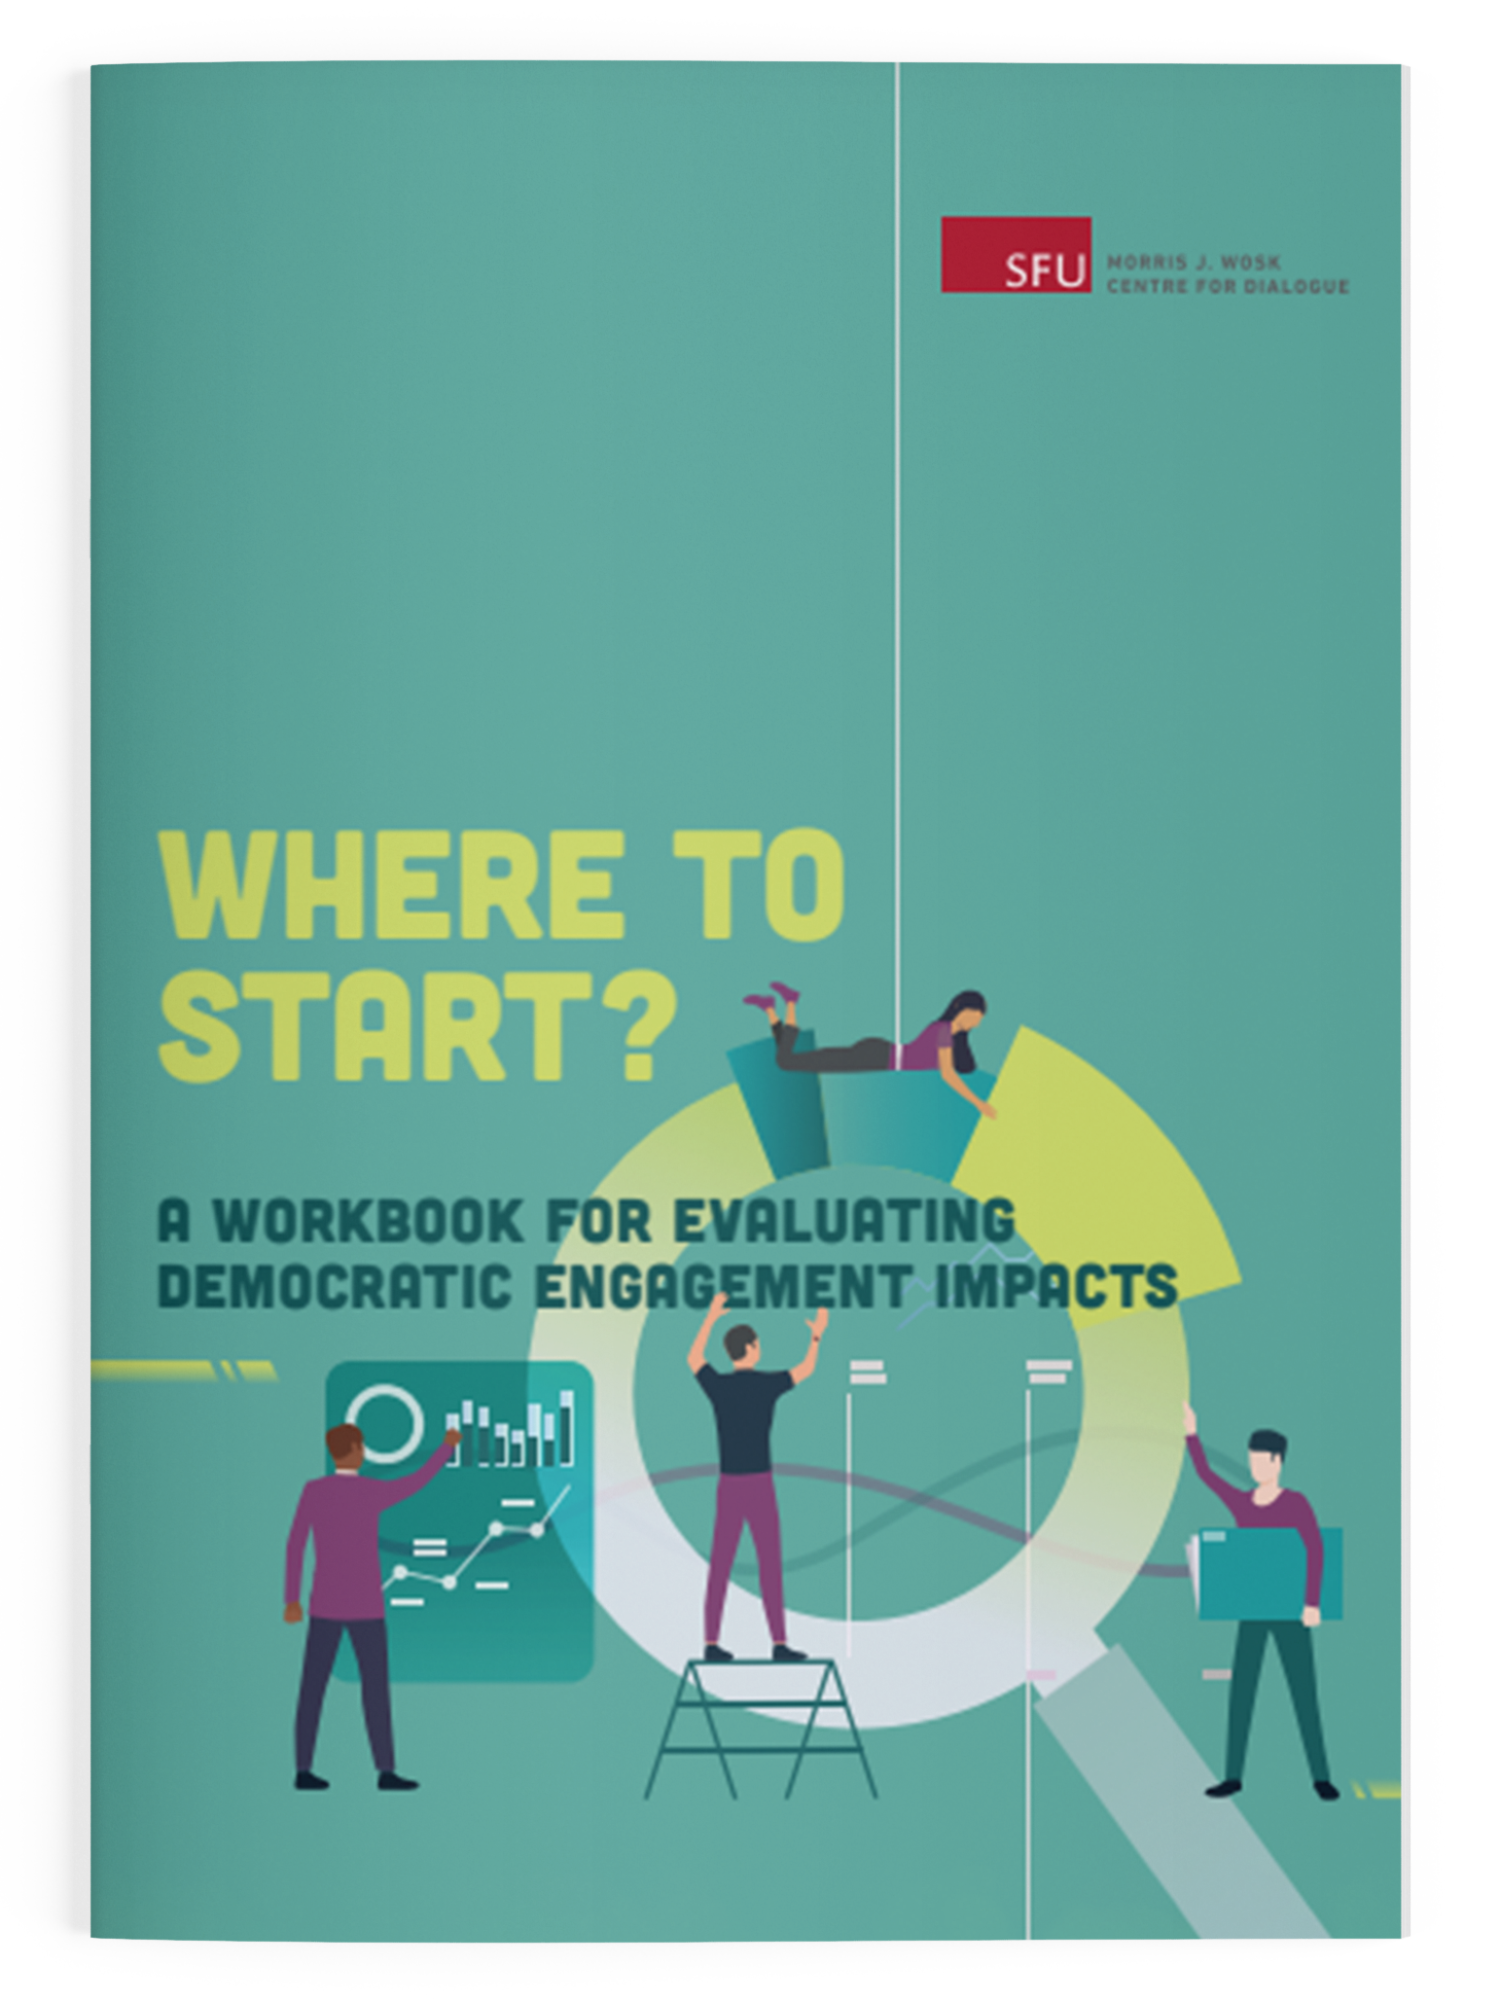 Mockup of the cover of the workbook for evaluating democratic engagement